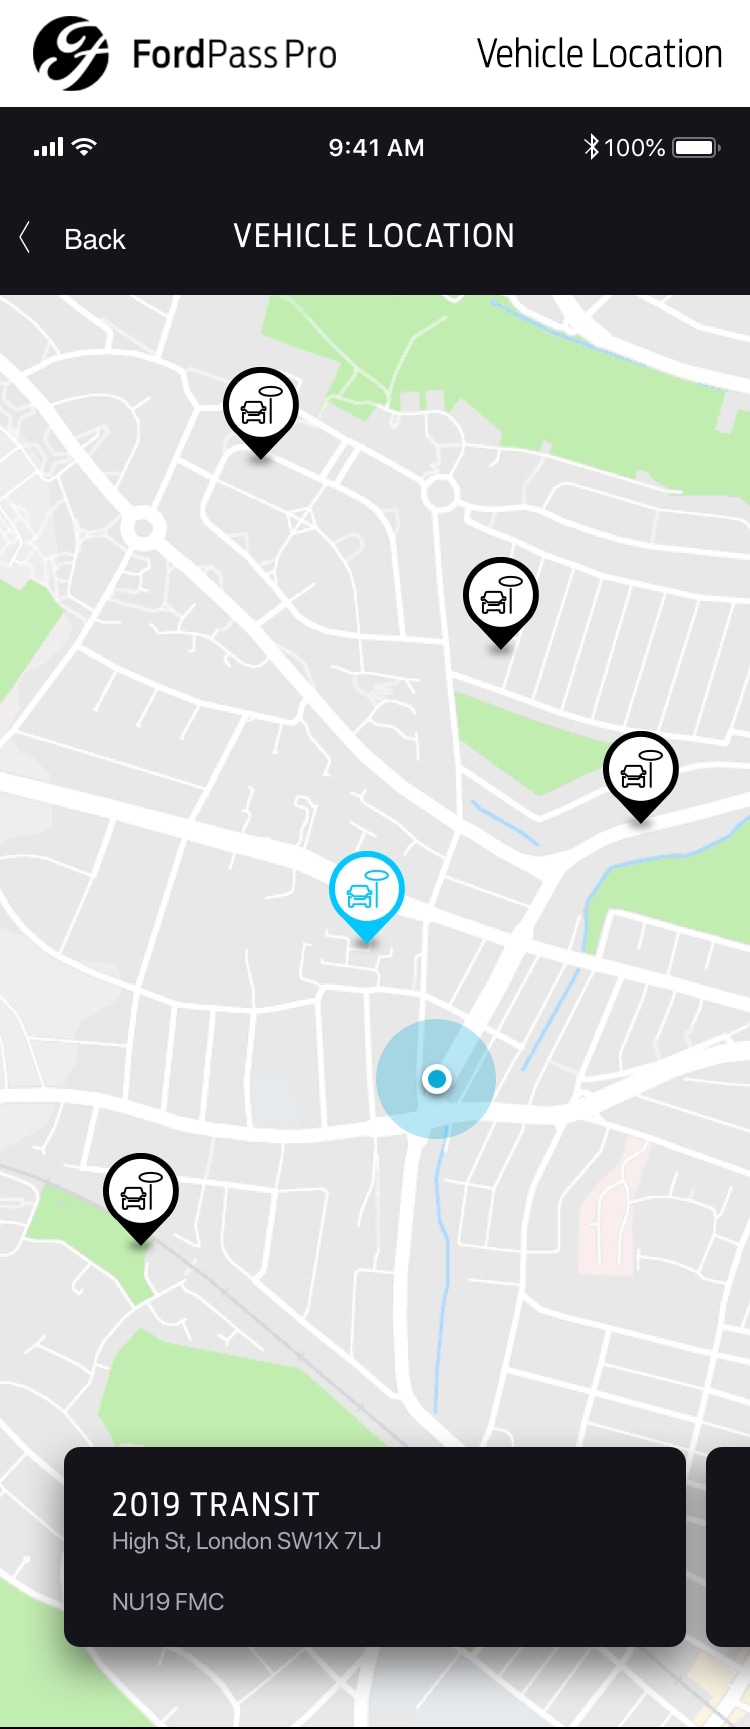 FordPass Pro - Vehicle Location (with Footer)